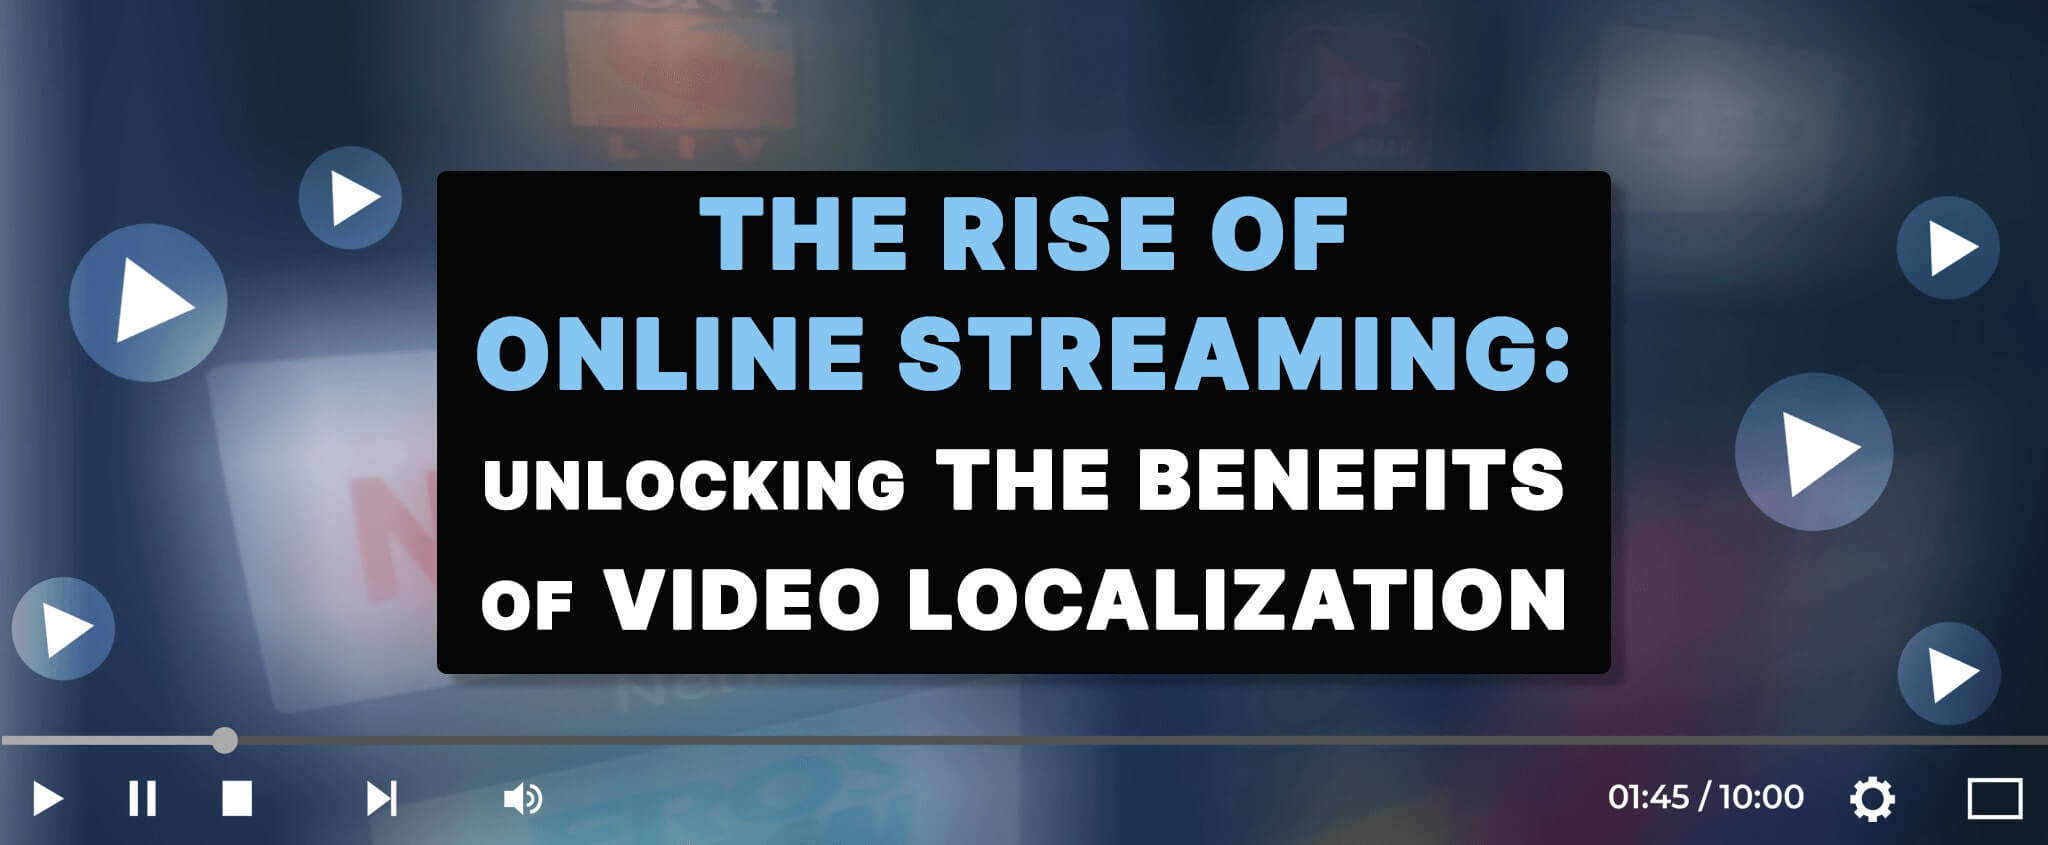 The Rise of Online Streaming: Unlocking the Benefits of Video Localization